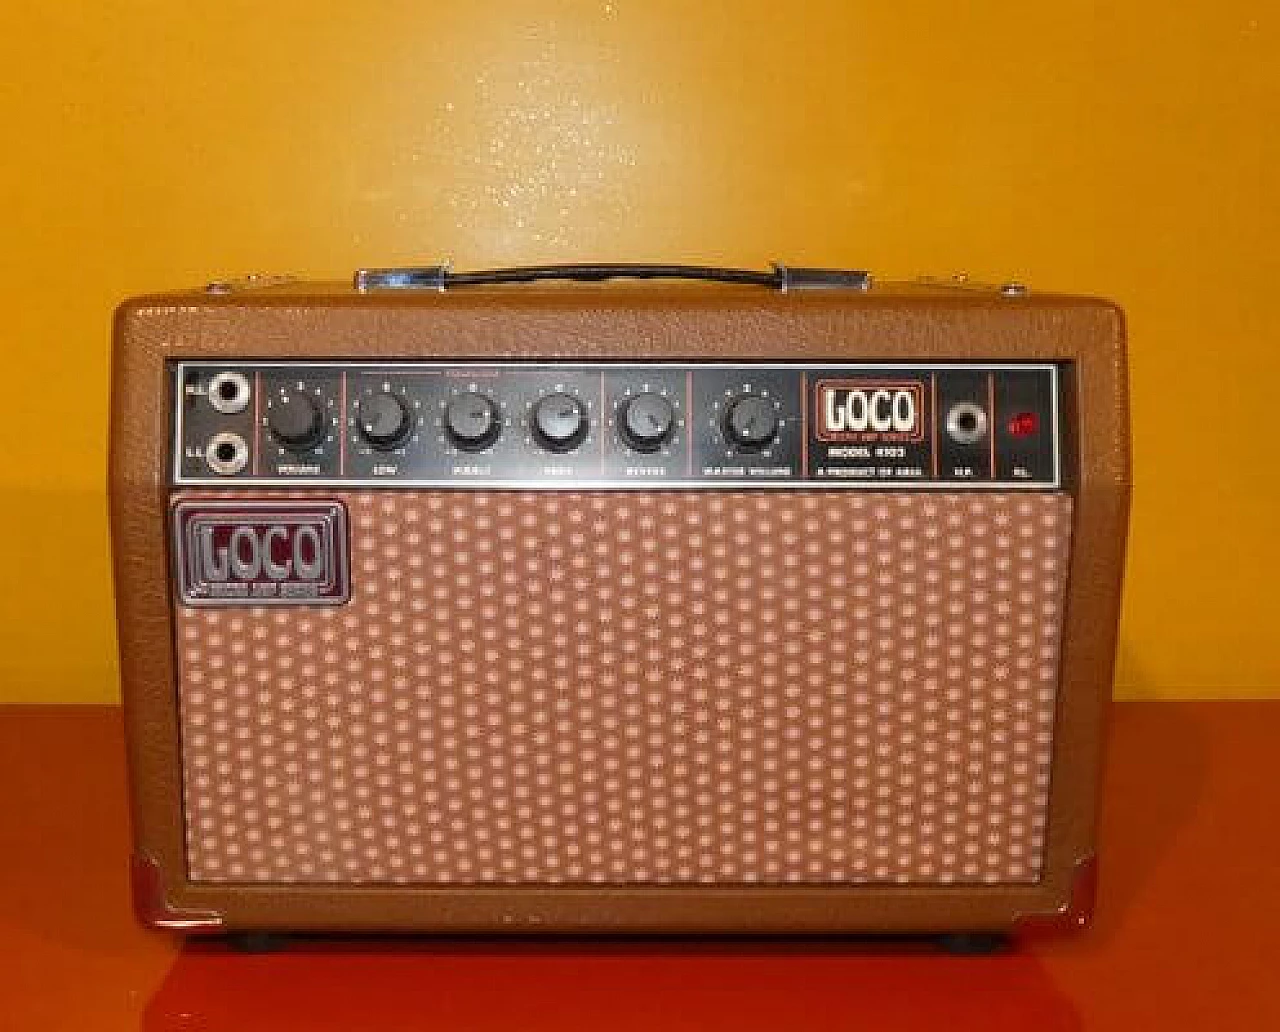 Loco 4102 amplifier from Aria, 1980s 1